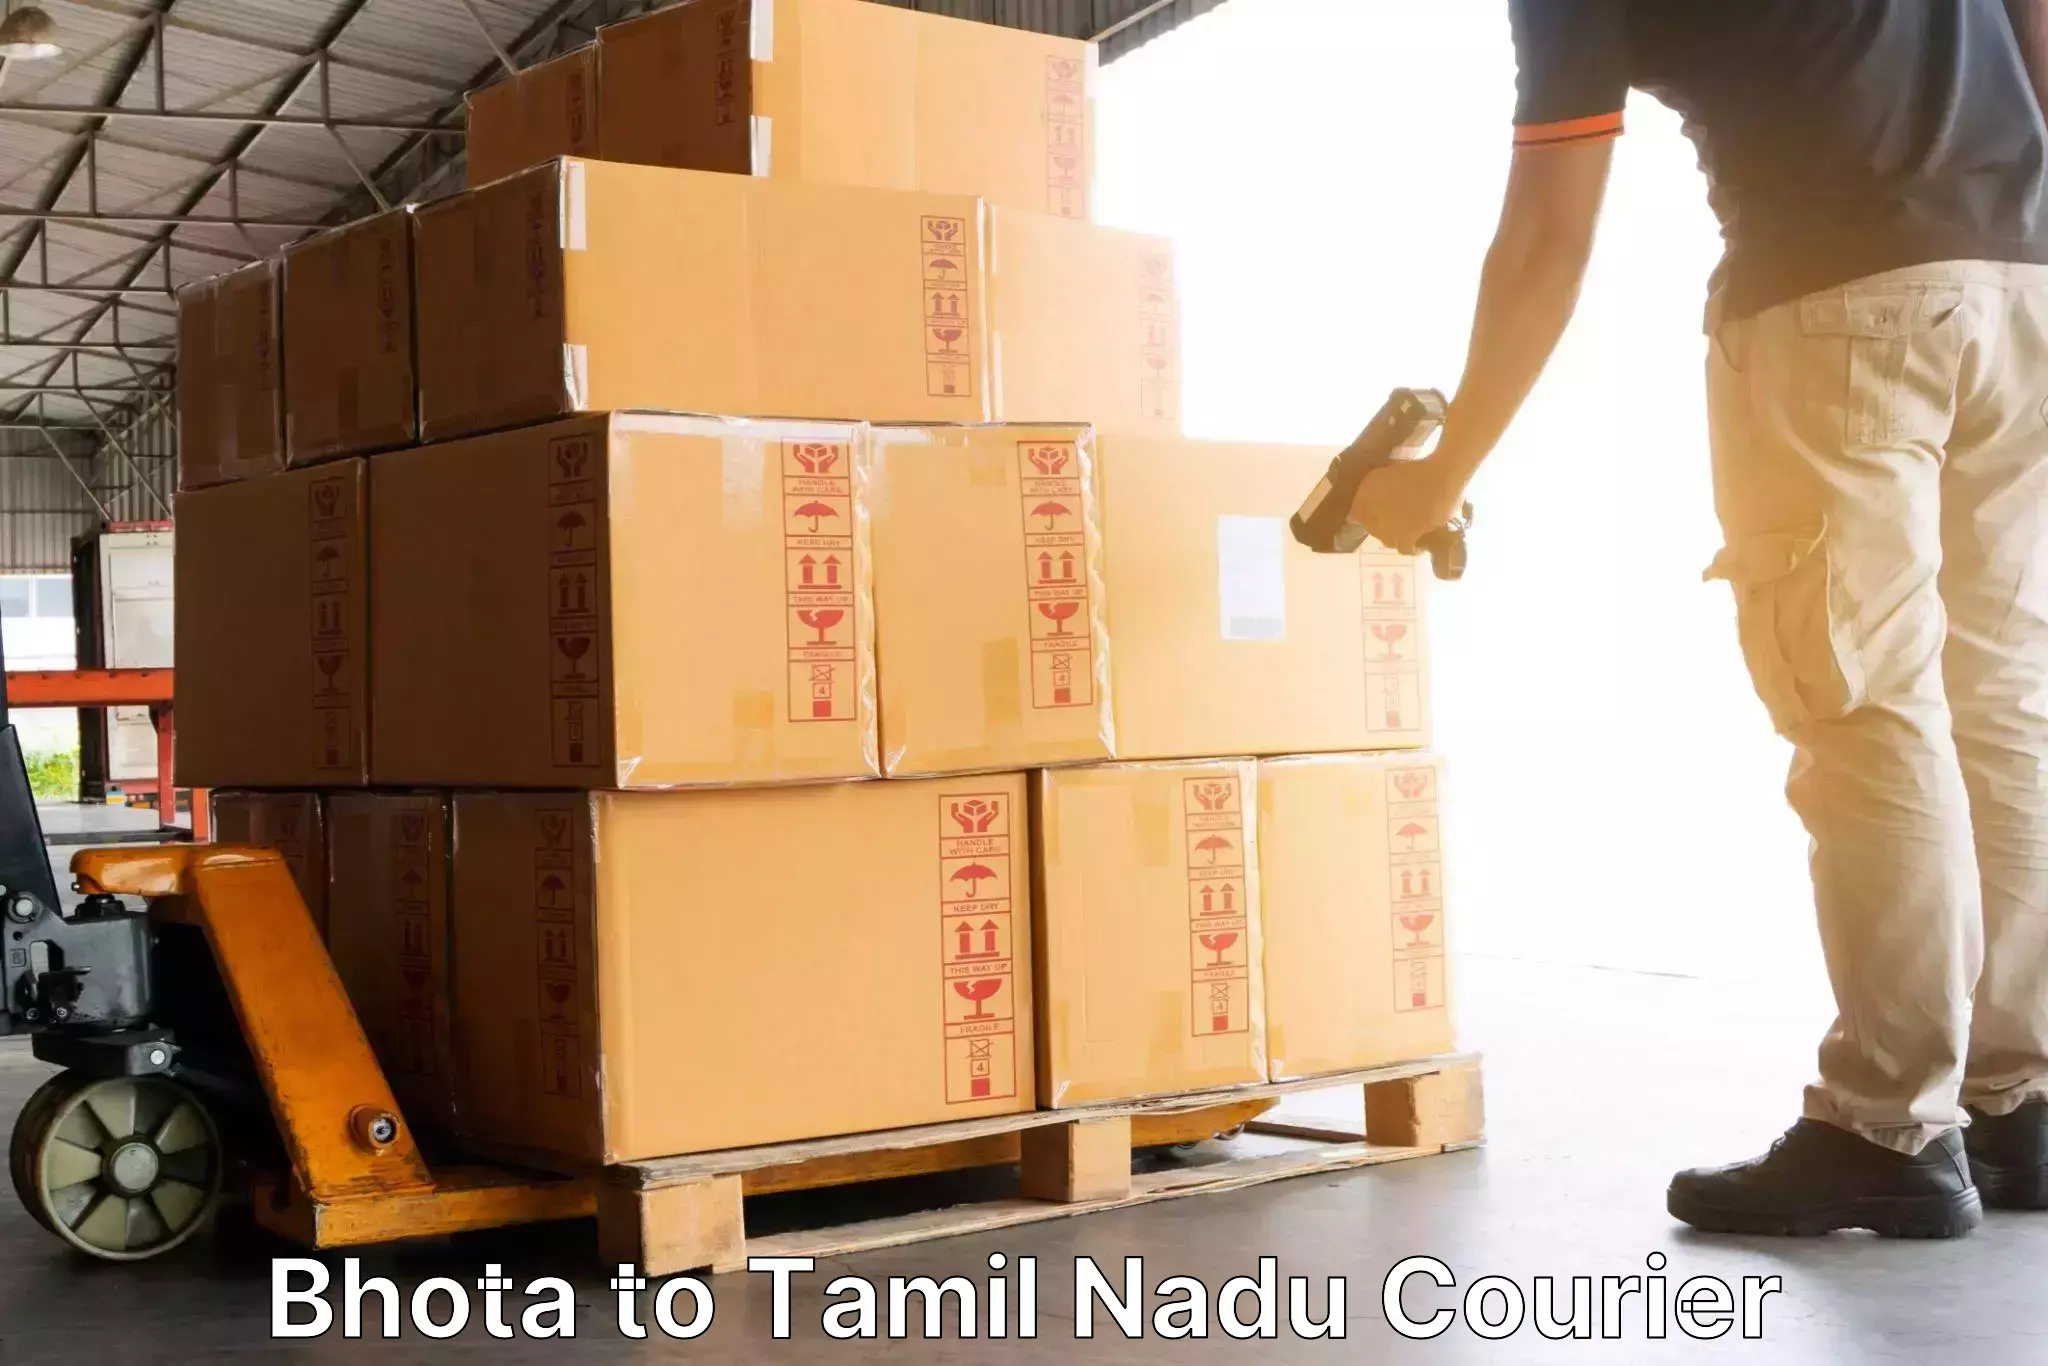 Fastest parcel delivery in Bhota to Aruppukkottai